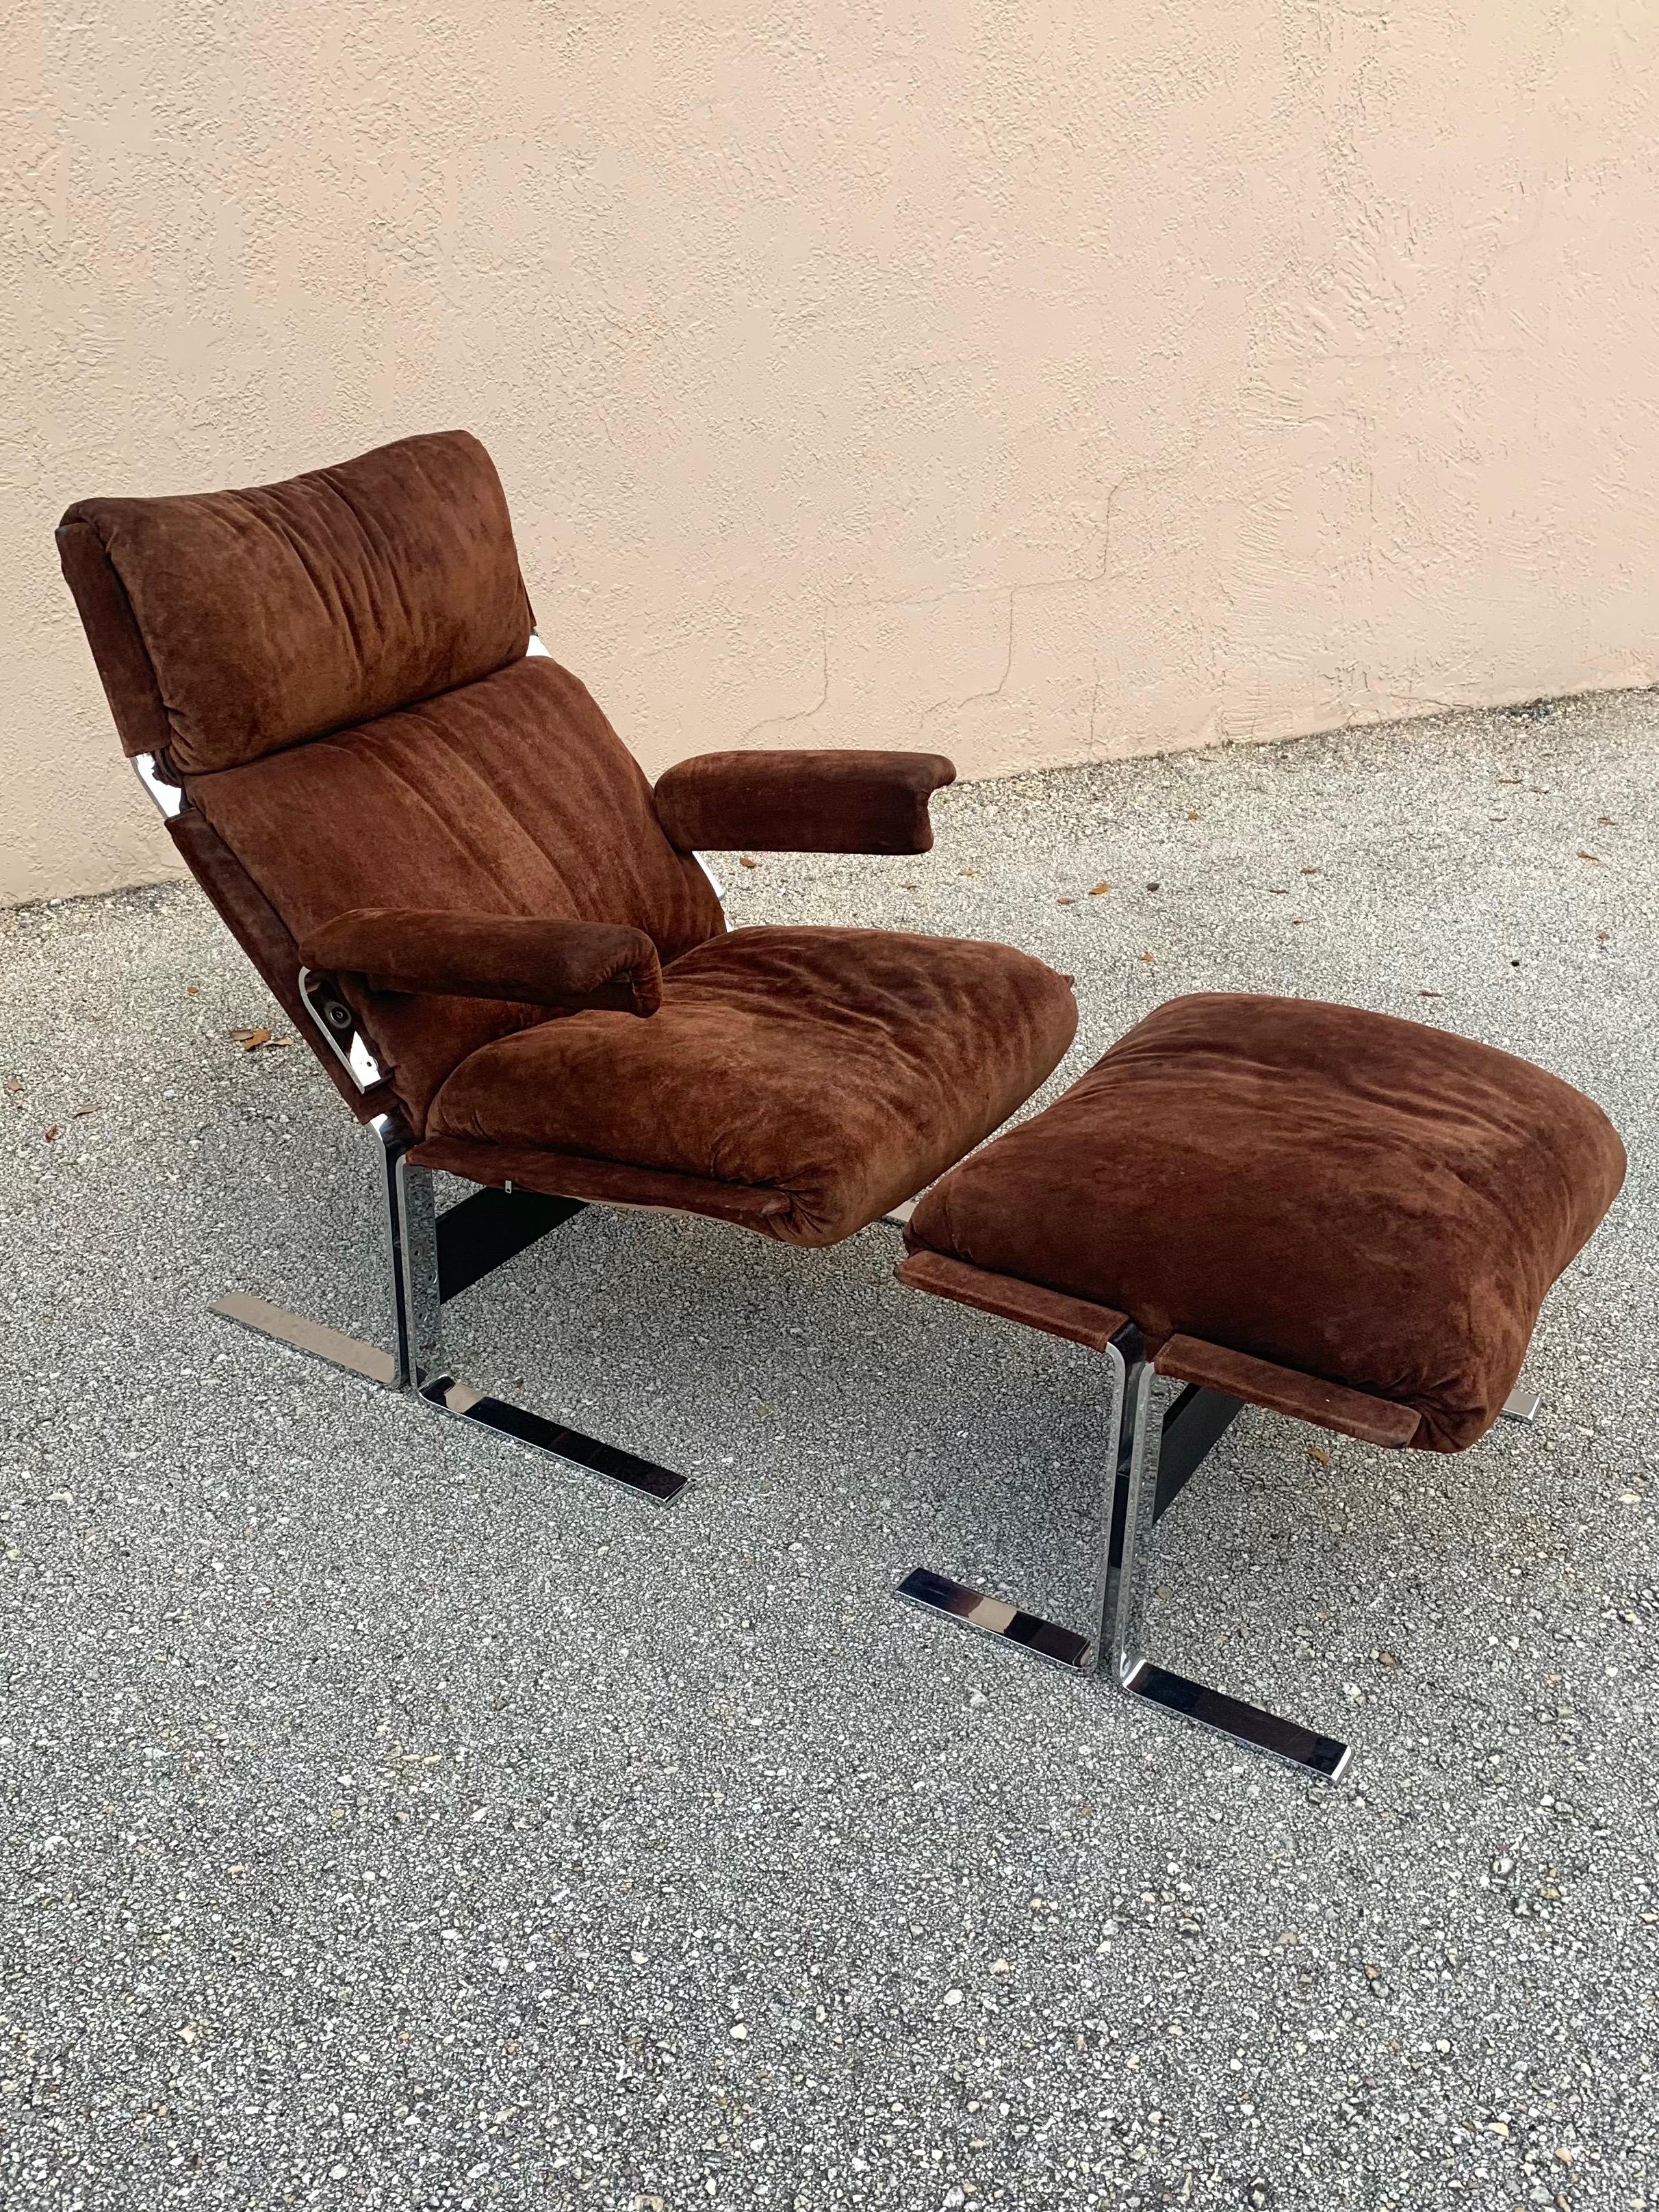 Mid Century Modern lounge chair and ottoman designed by Richard Hersberger for Pace Furniture. Chairs are upholstered in their beautiful original brown suede leather. Frames are heavy and sturdy polished chrome with a stretcher. 

The chairs are